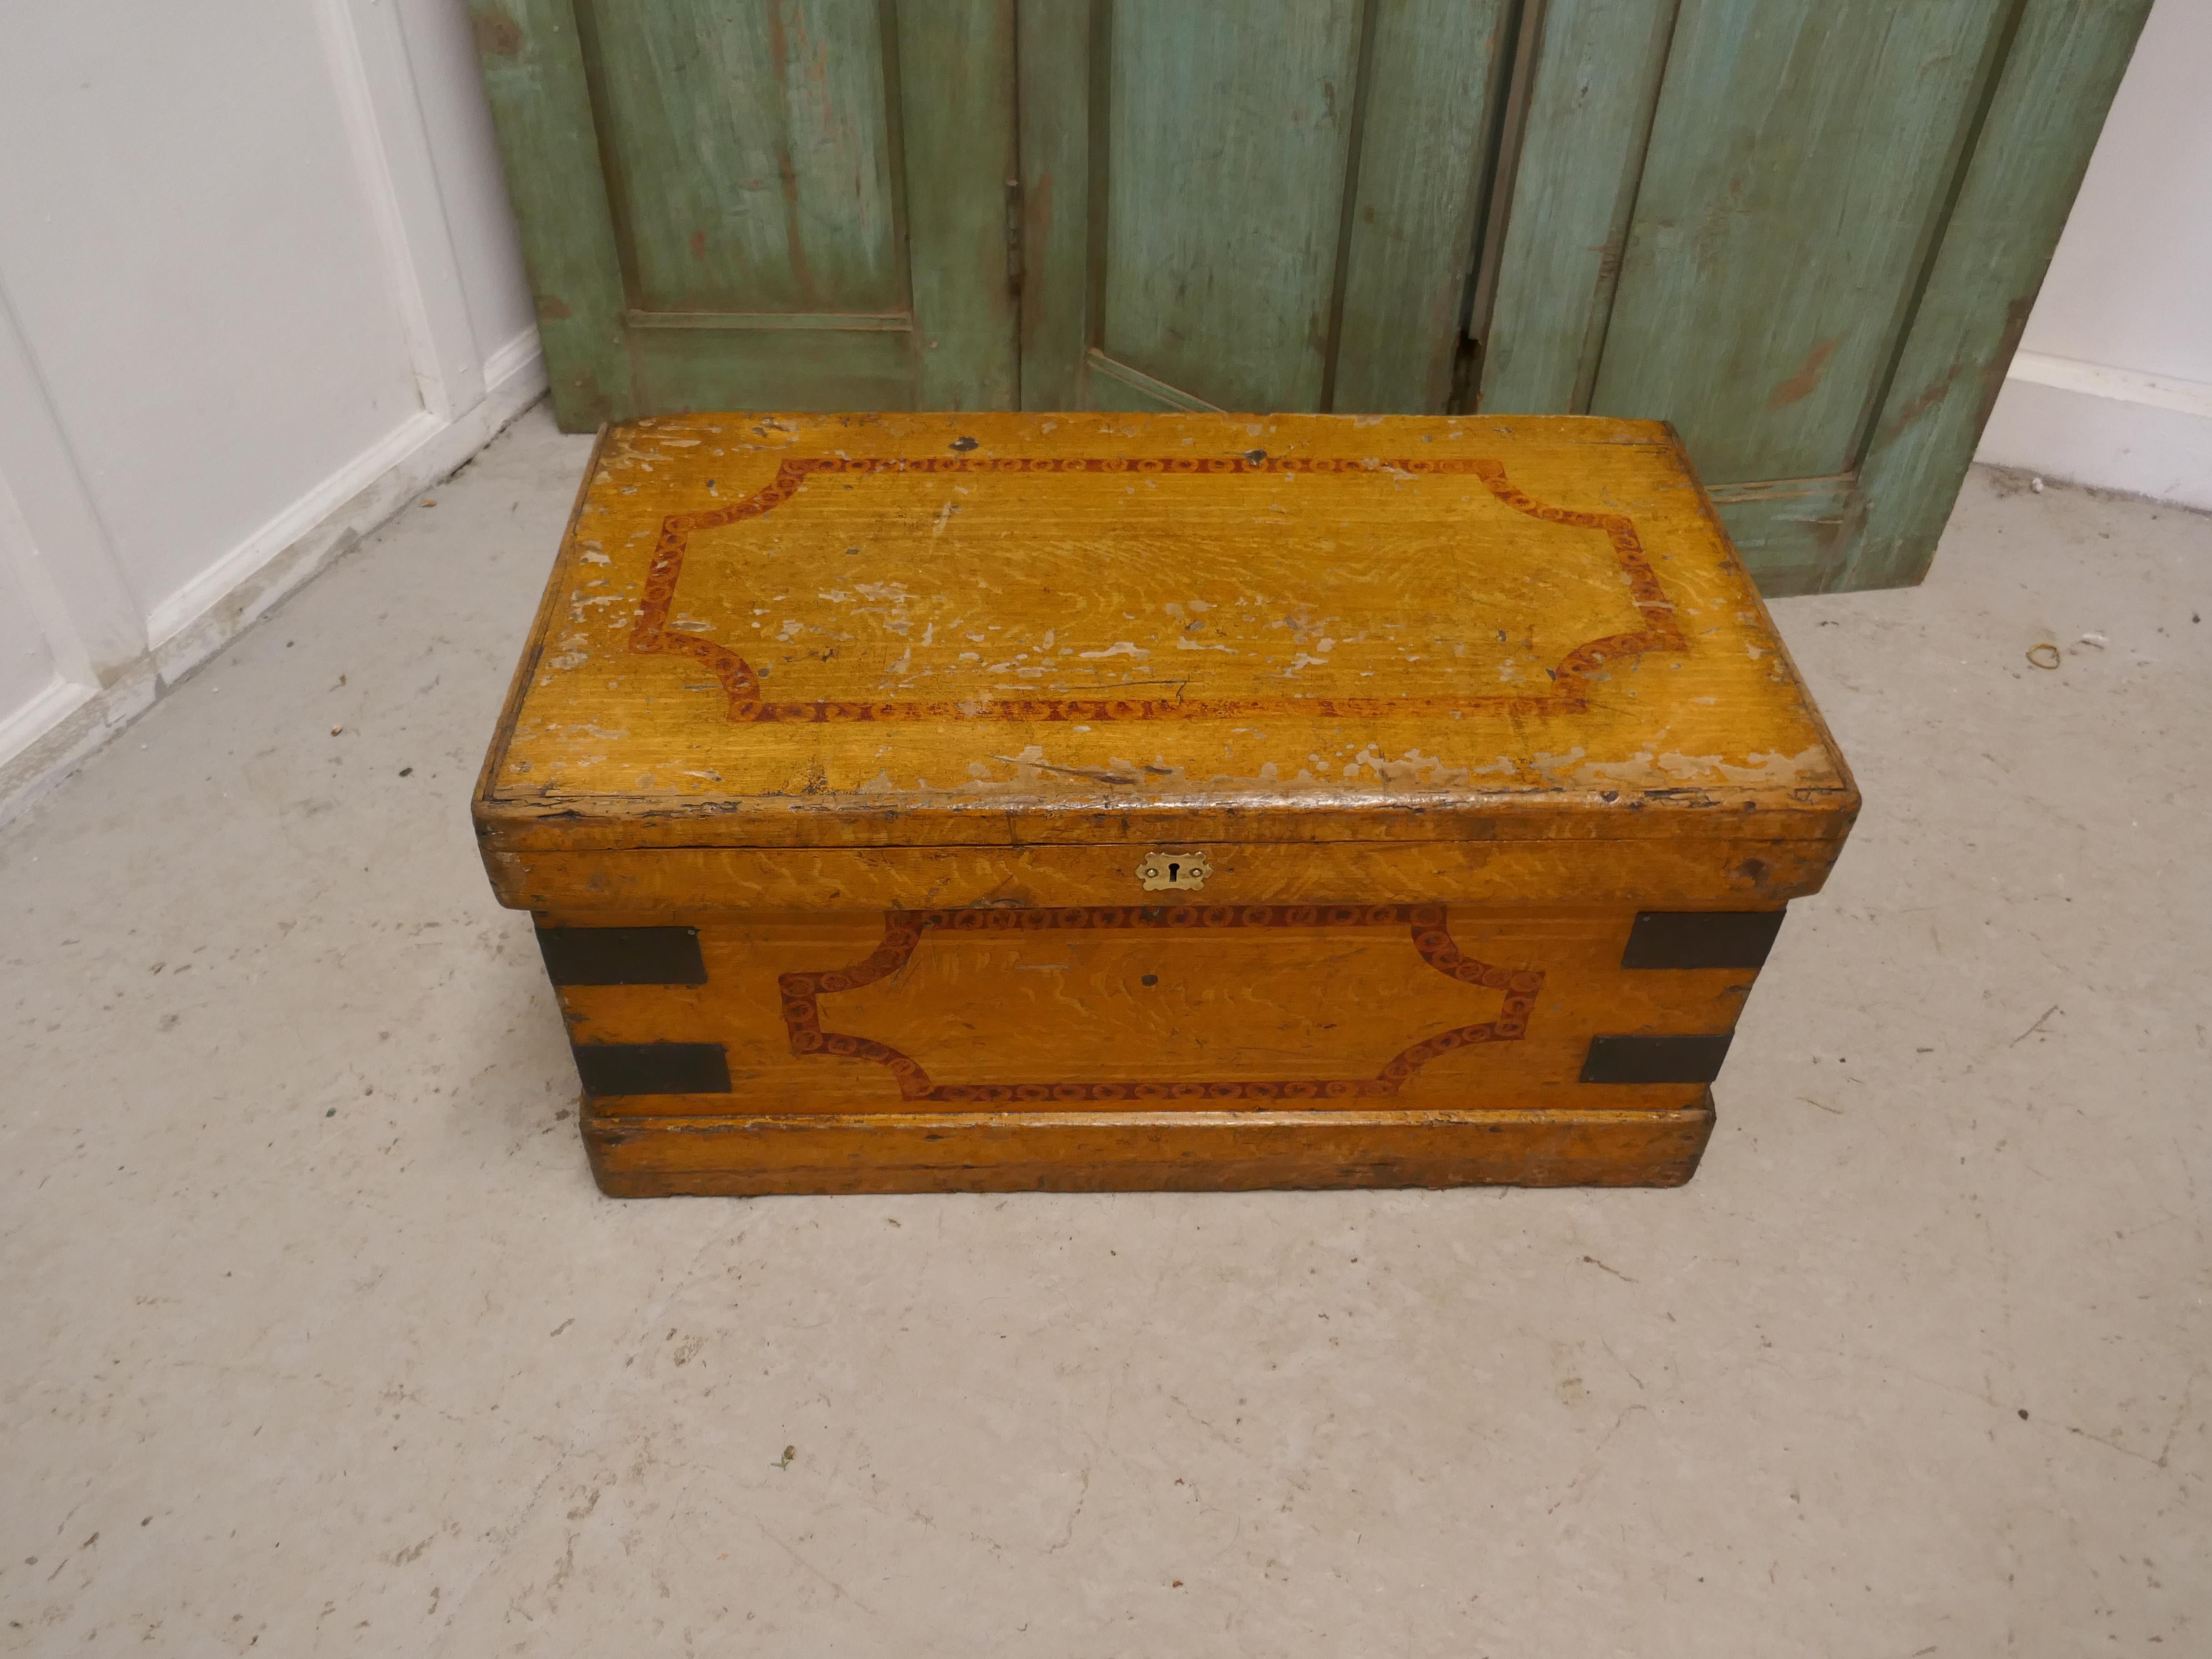 A Victorian pine blanket chest

This is a best quality box, it has an original scumble finish and the interior is lined with the original decorative paper 
The box has iron banding on the outside, it stands on a small plinth and has carrying